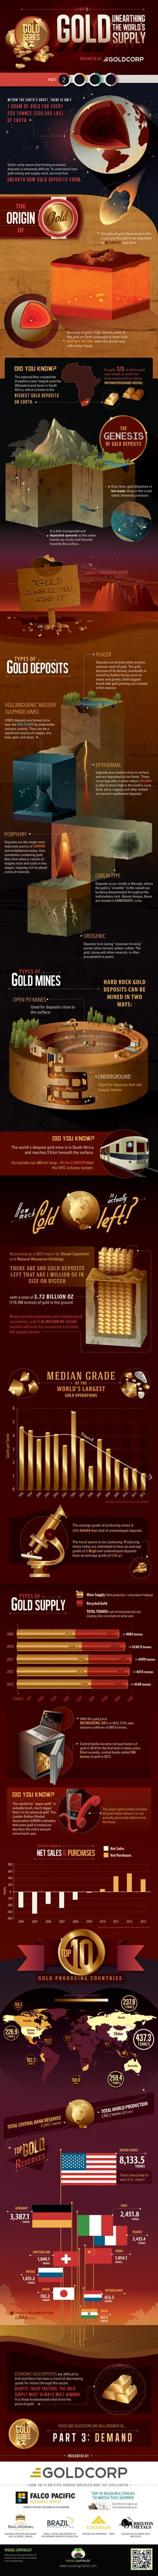 Unearthing the World's Supply of Gold - Visual Capitalist